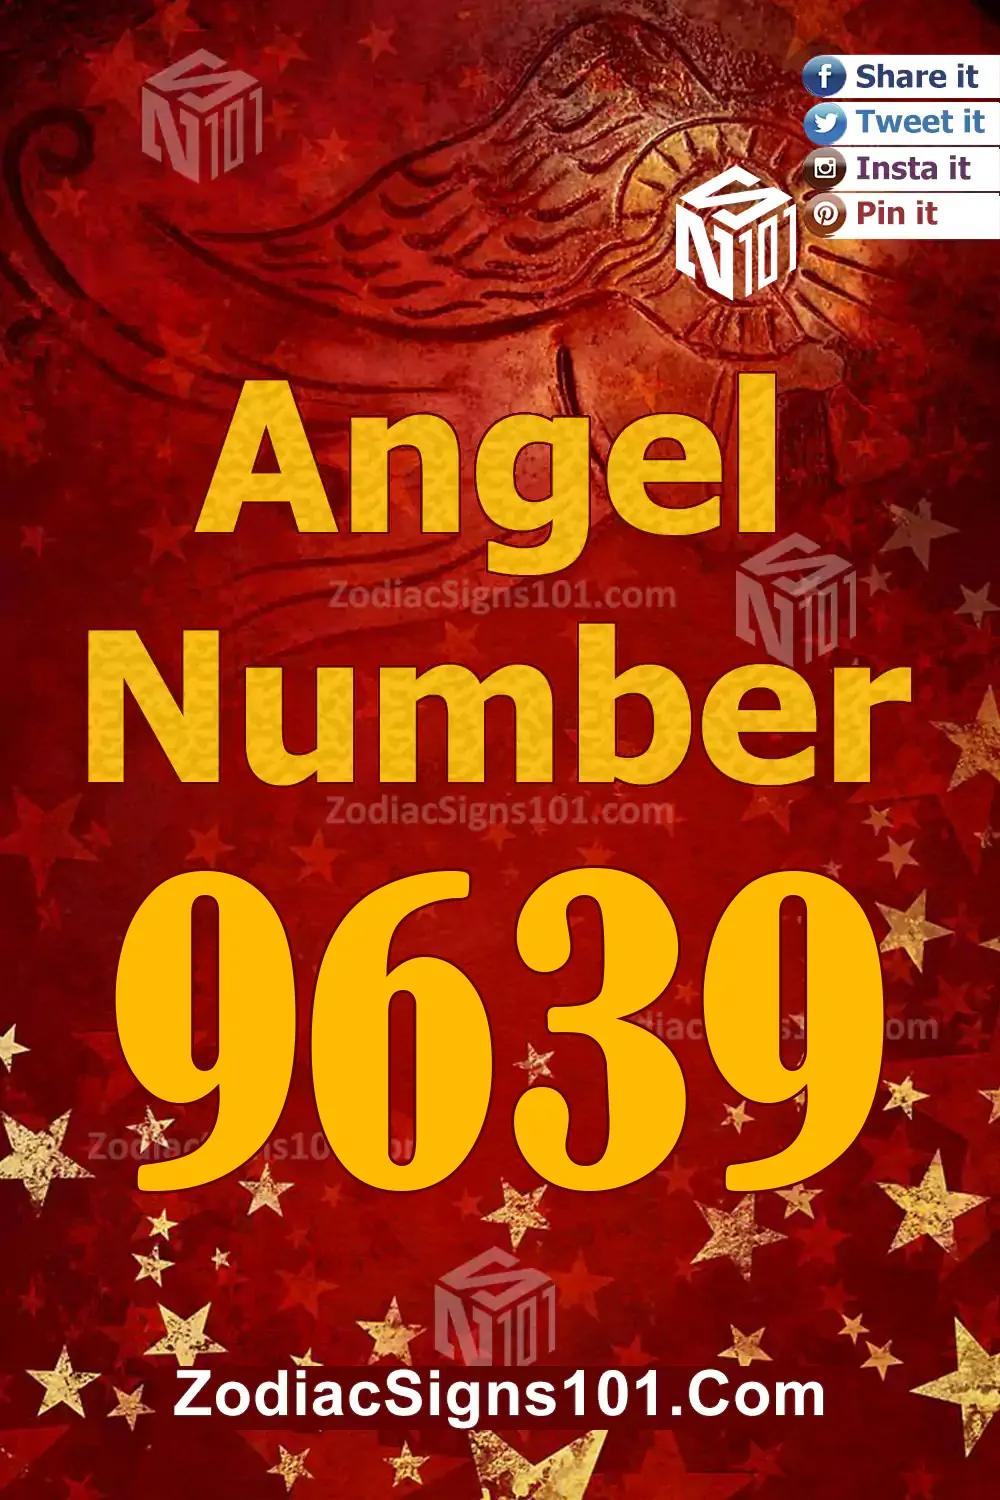 9639 Angel Number Meaning